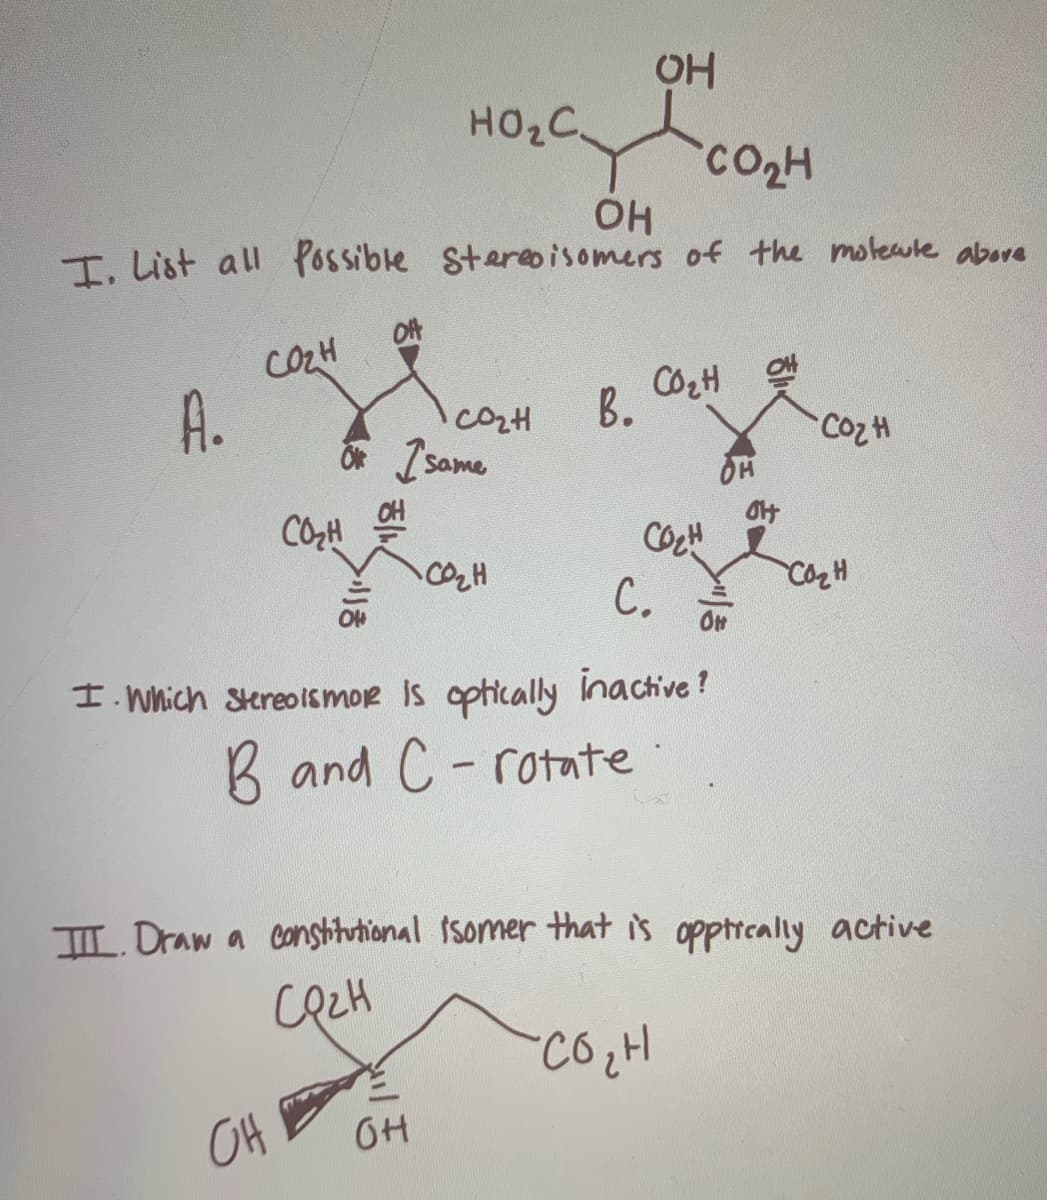 HO2C
CO2H
I. List all Possible Stereoisomers of the motewle abore
OfA
COZH
A.
B.
CozH
OF same
CH
CO,H
С.
I. Which Stereo Ismor is ophically inactive?
B and C- rotate
L Draw a conshitutional 1somer that is opptreally active
OH
OH
